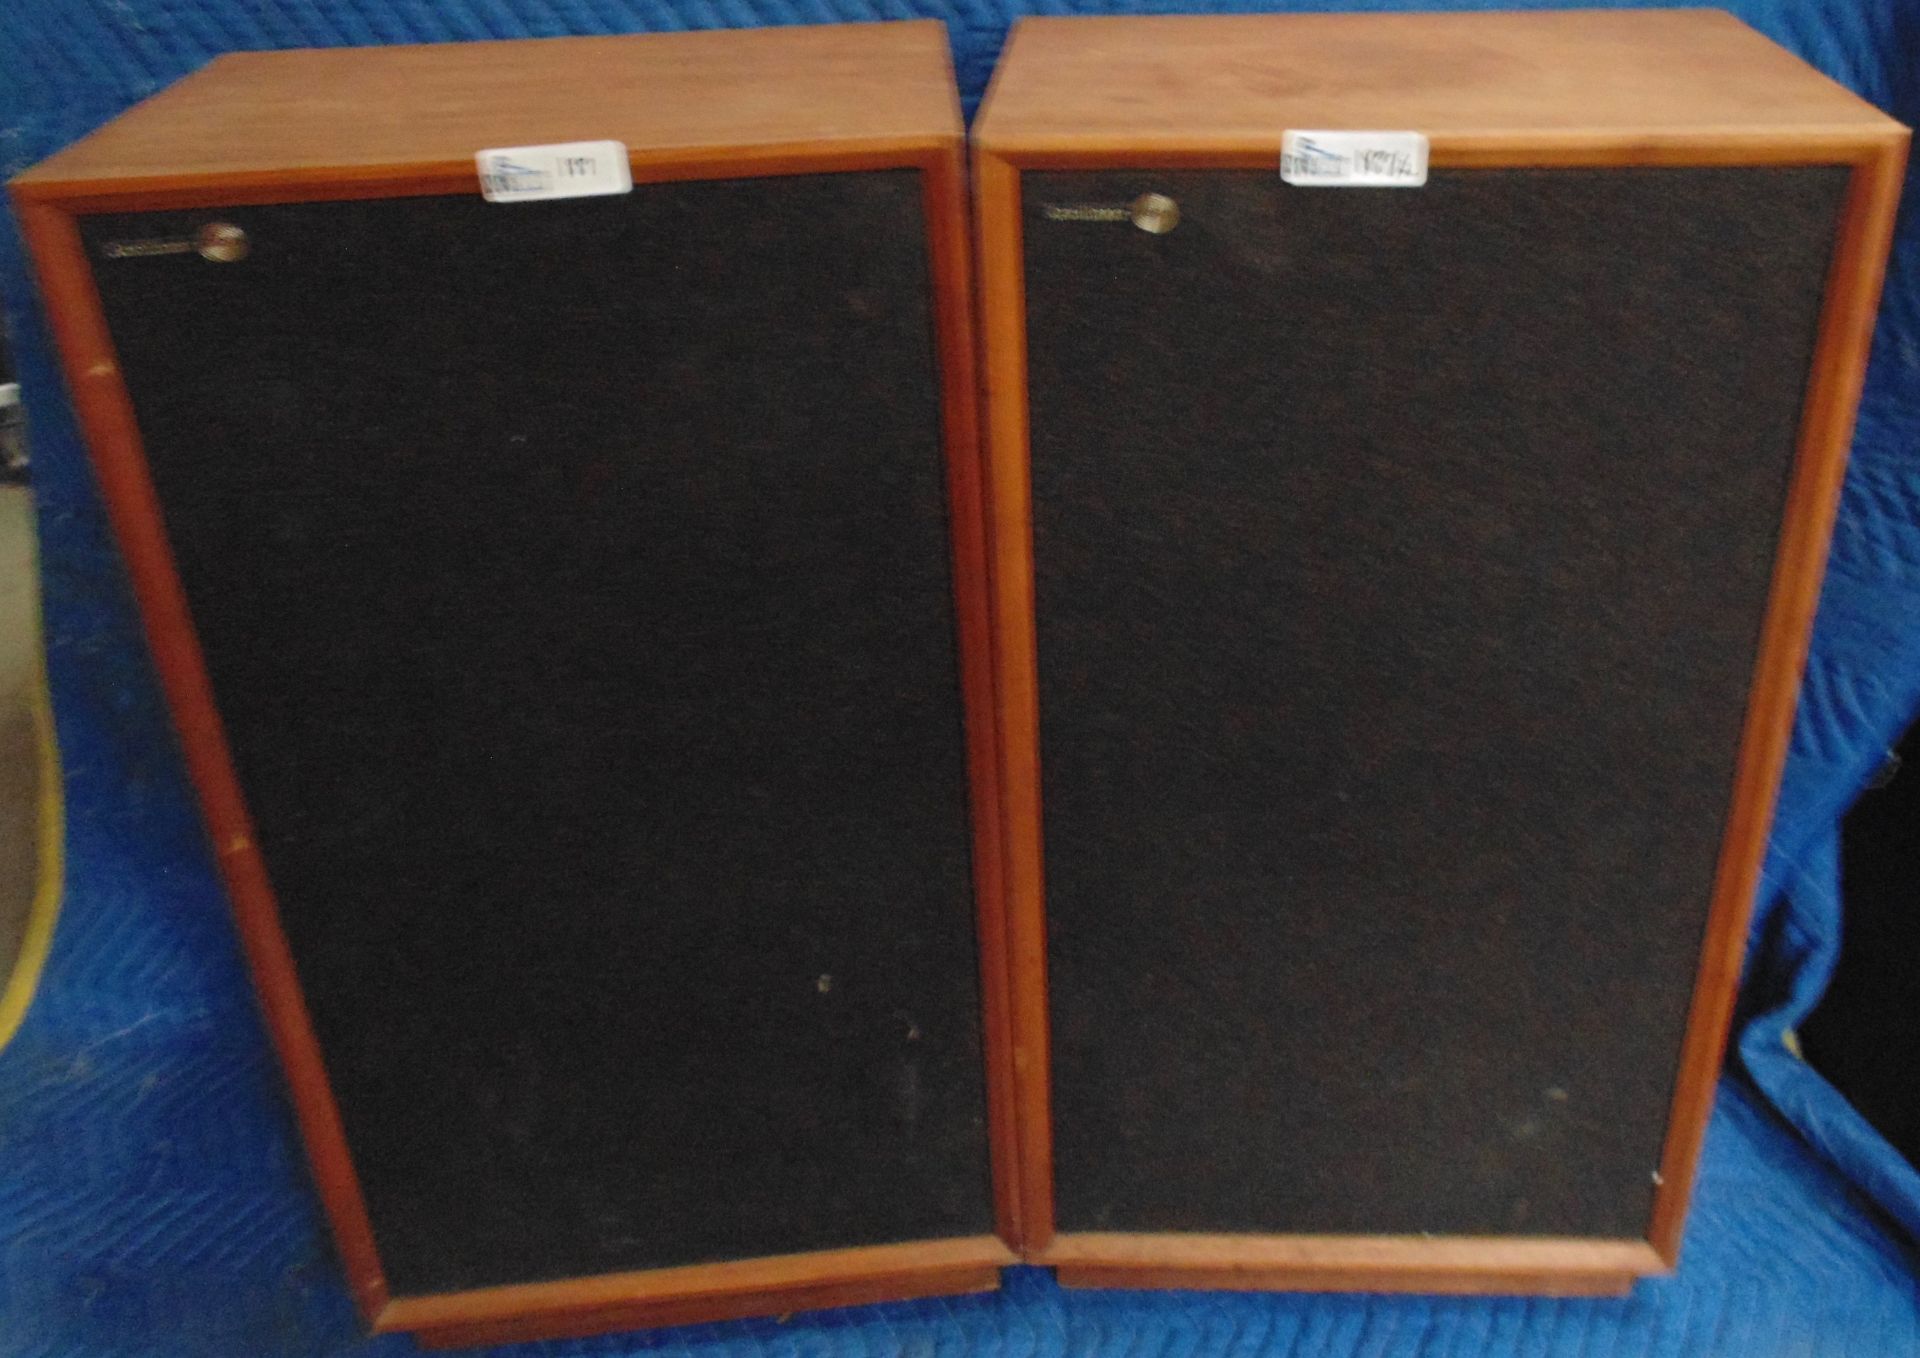 LOT OF 2 RECTILINEAR SPEAKERS